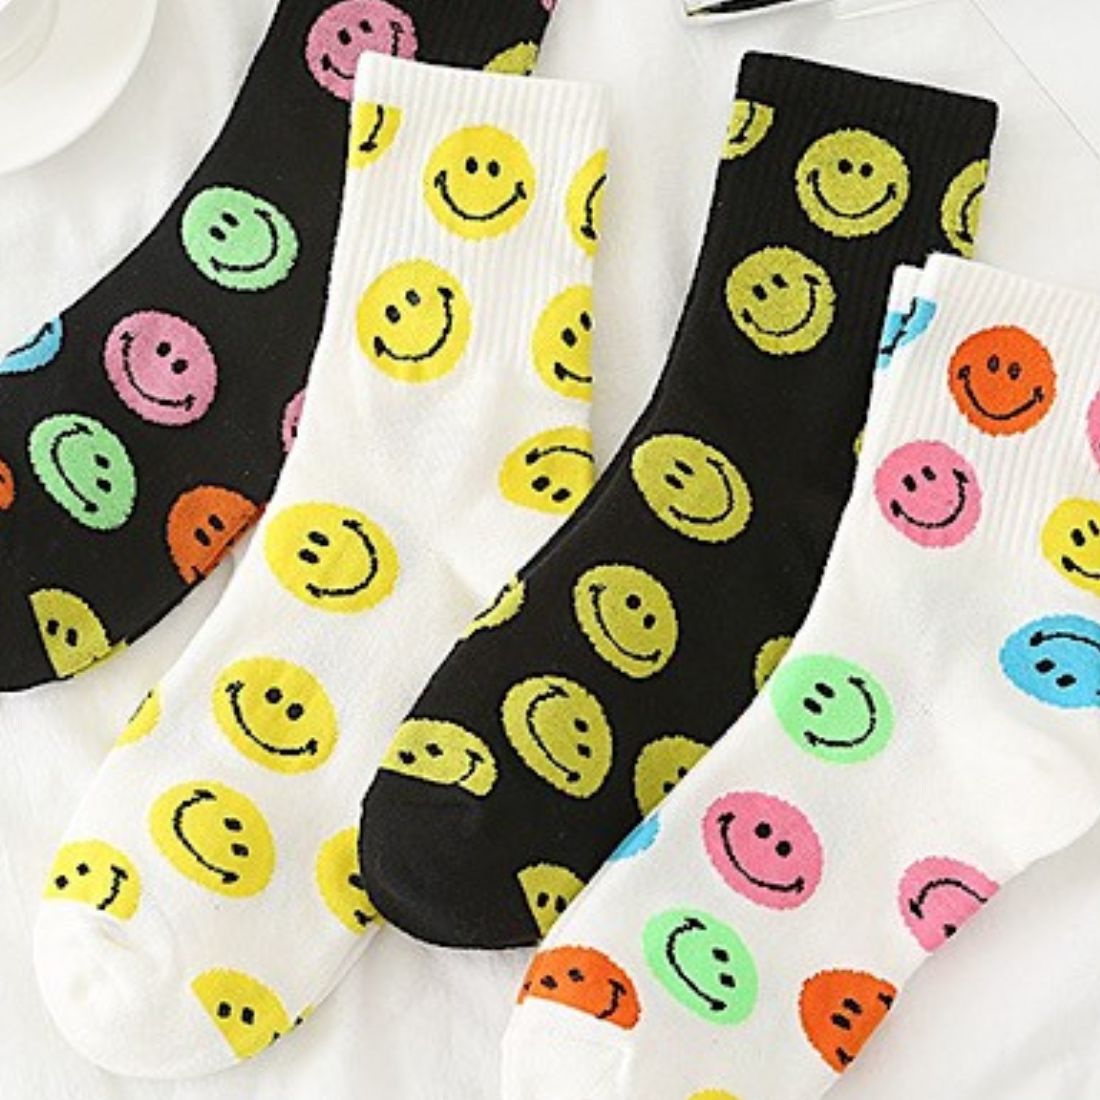 smiley socks in white with yellow smiley faces 111317